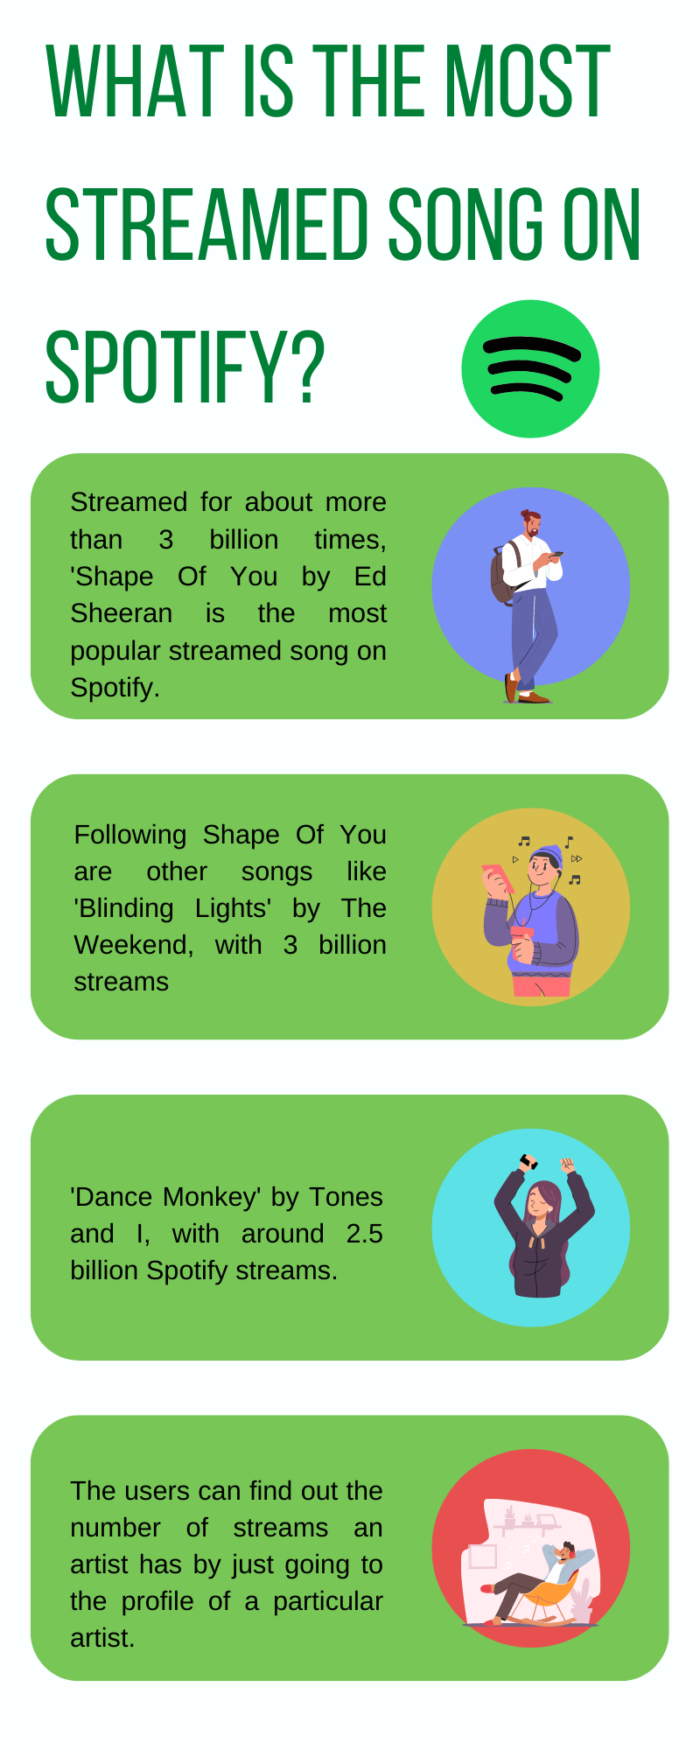 What Is The Most Streamed Song On Spotify?